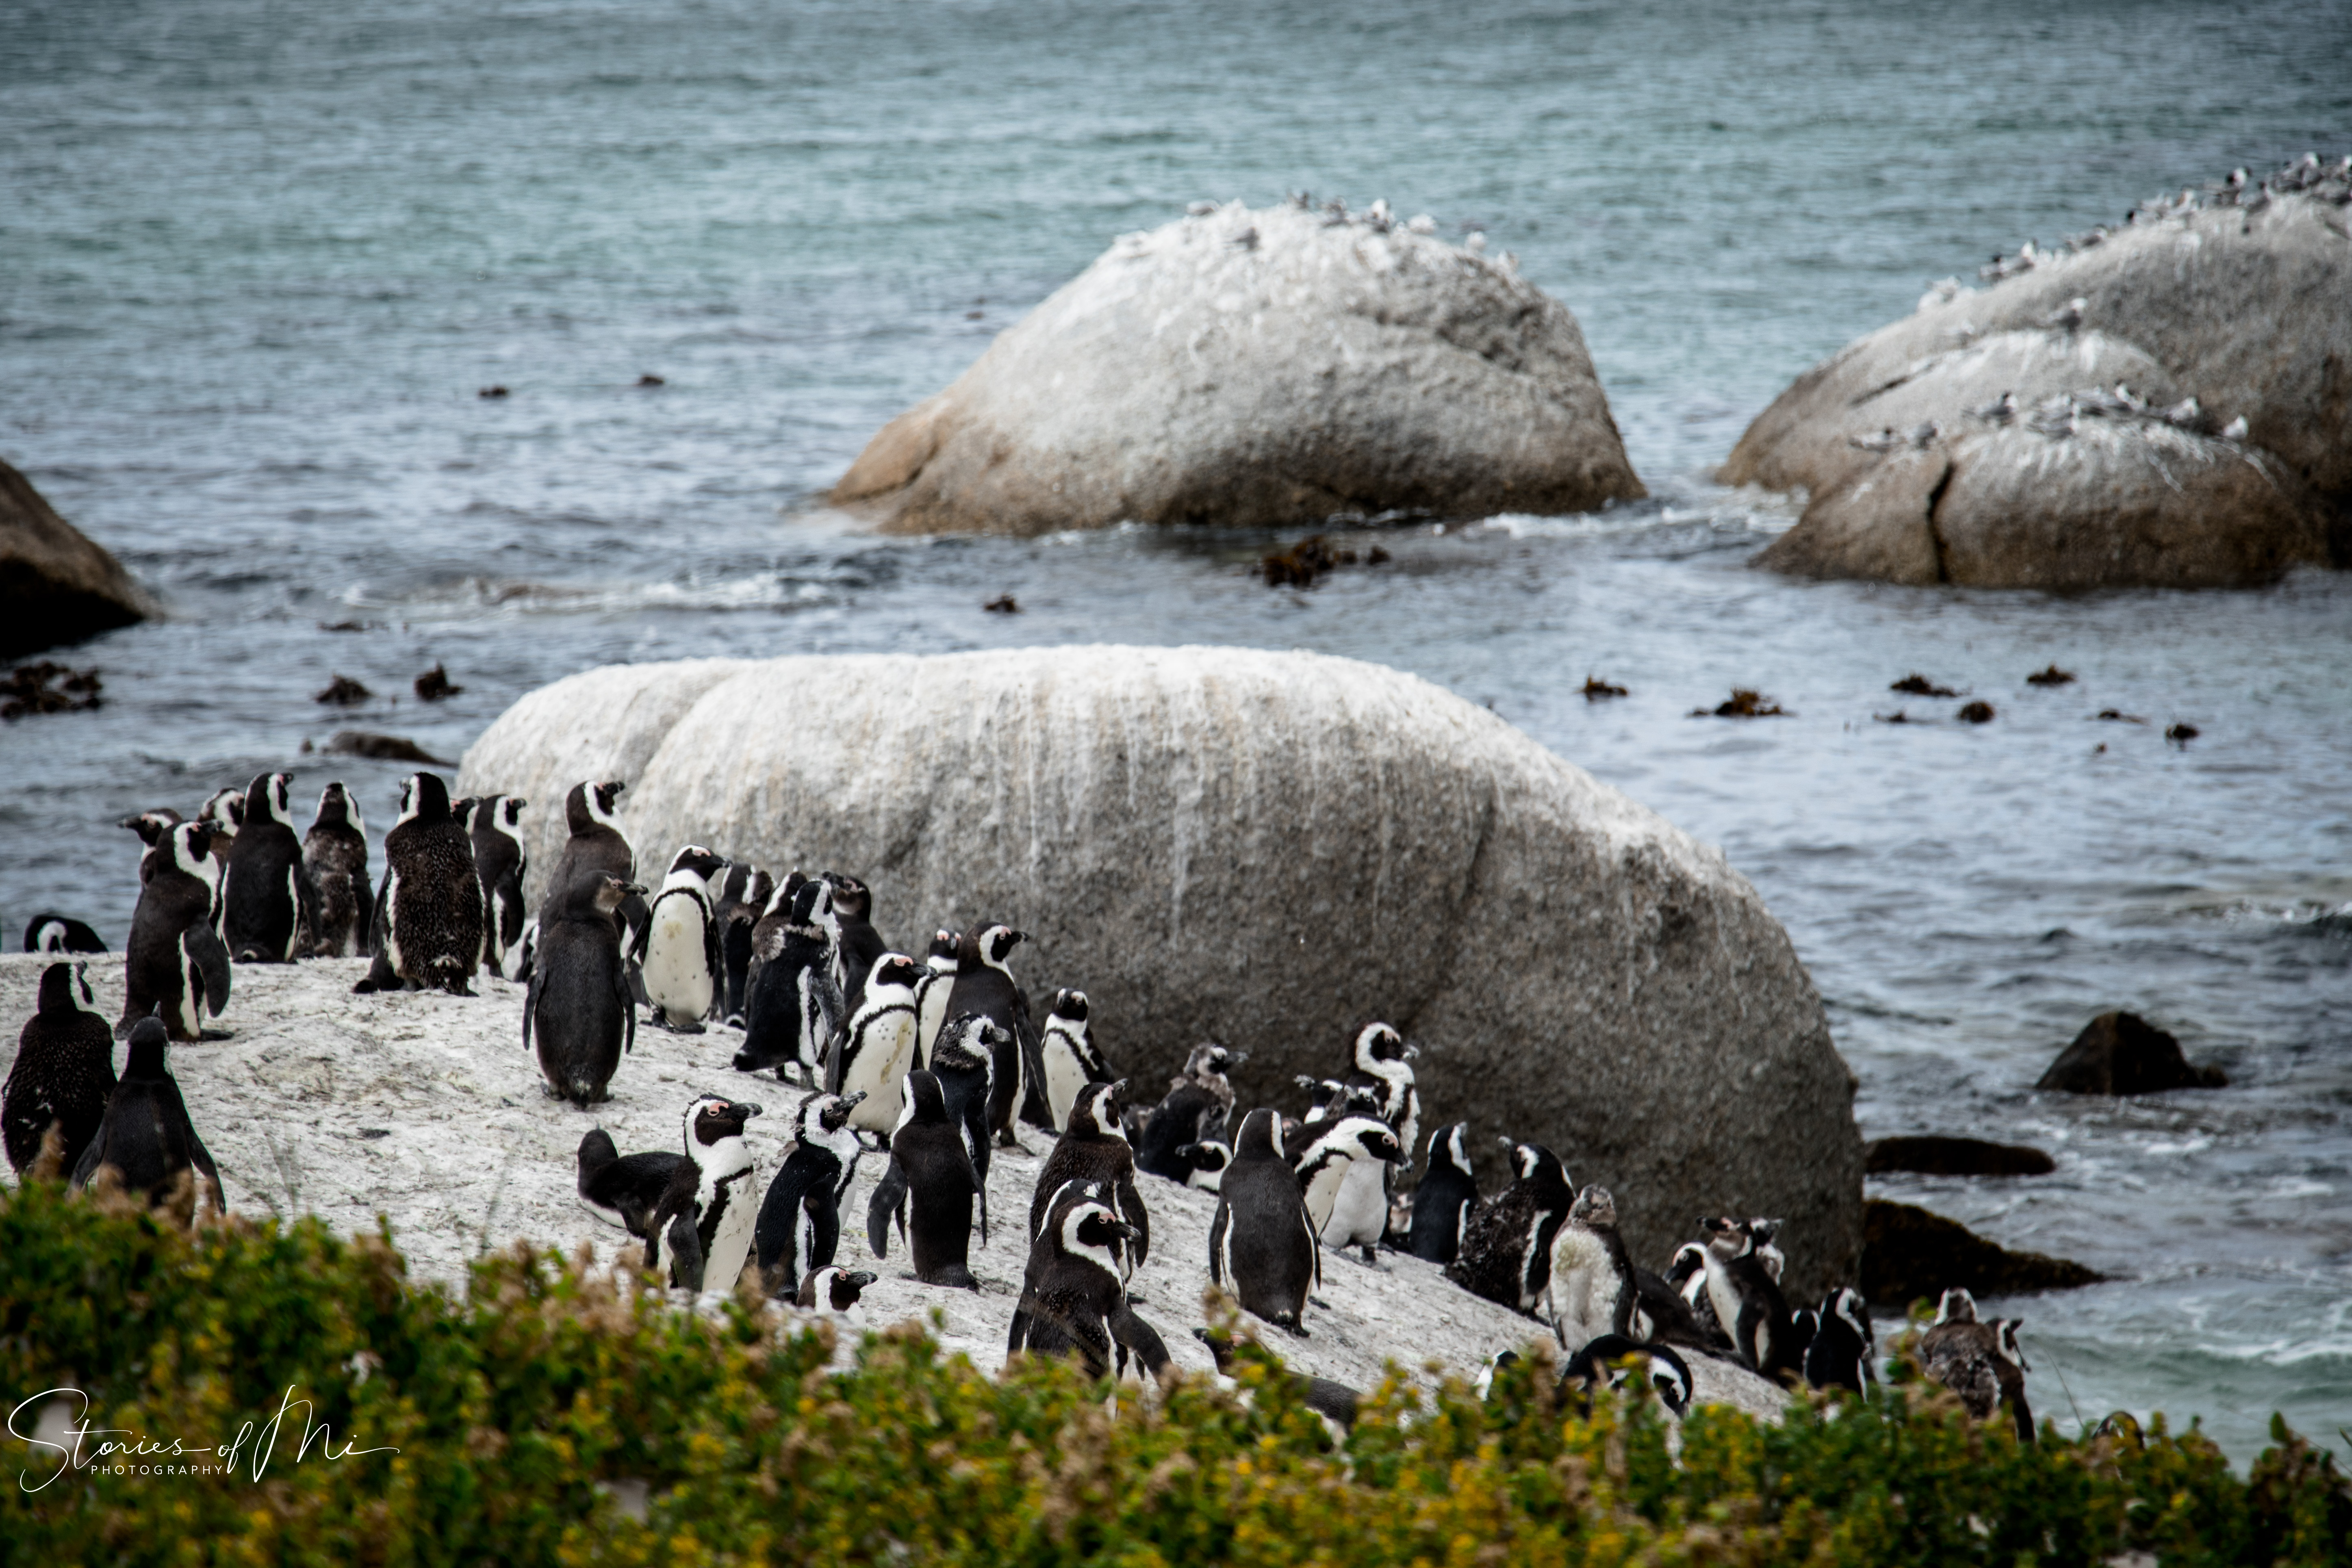 The penguins of Boulders beach